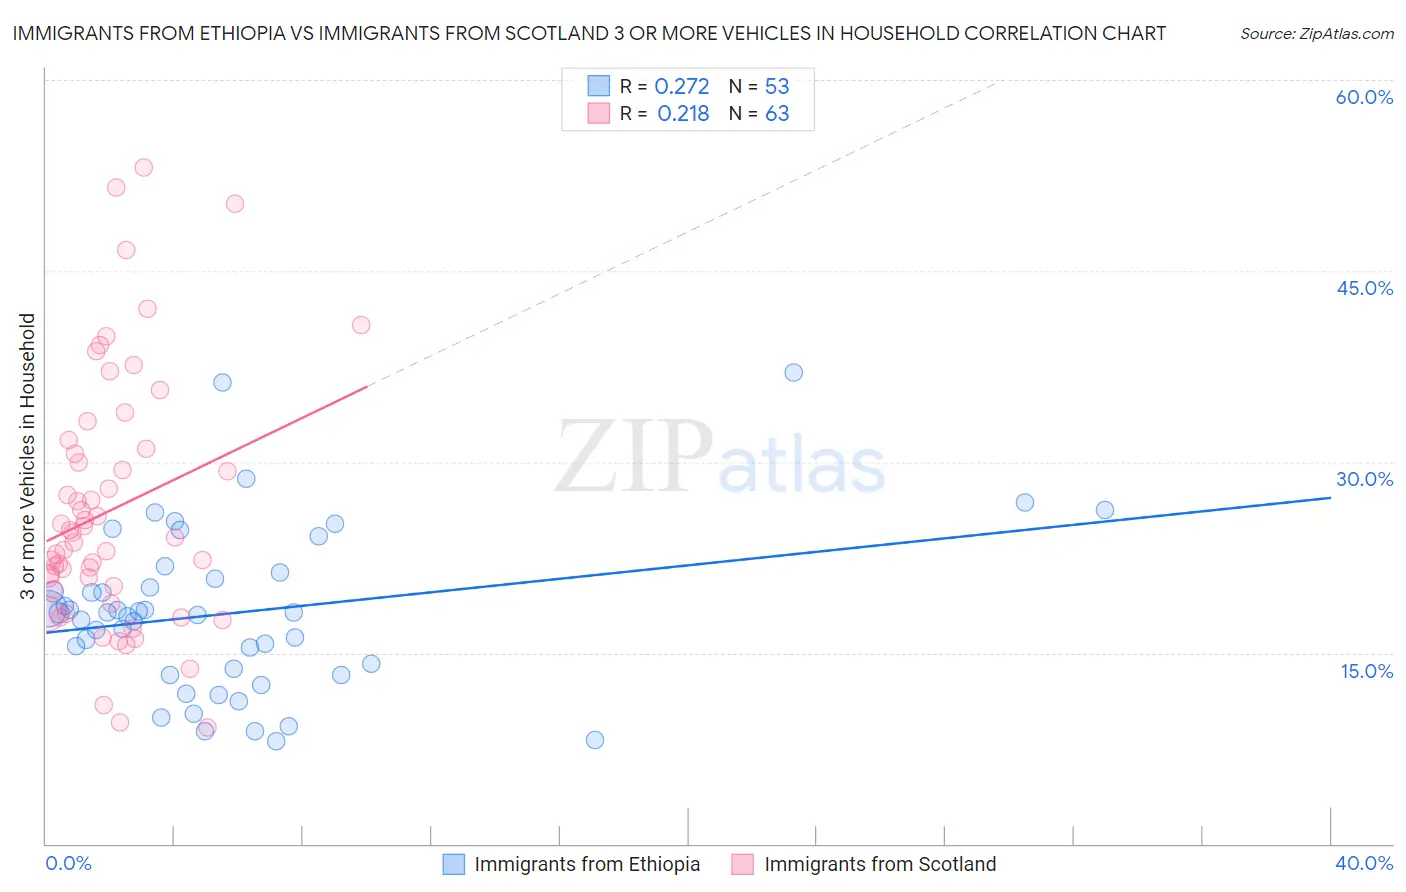 Immigrants from Ethiopia vs Immigrants from Scotland 3 or more Vehicles in Household